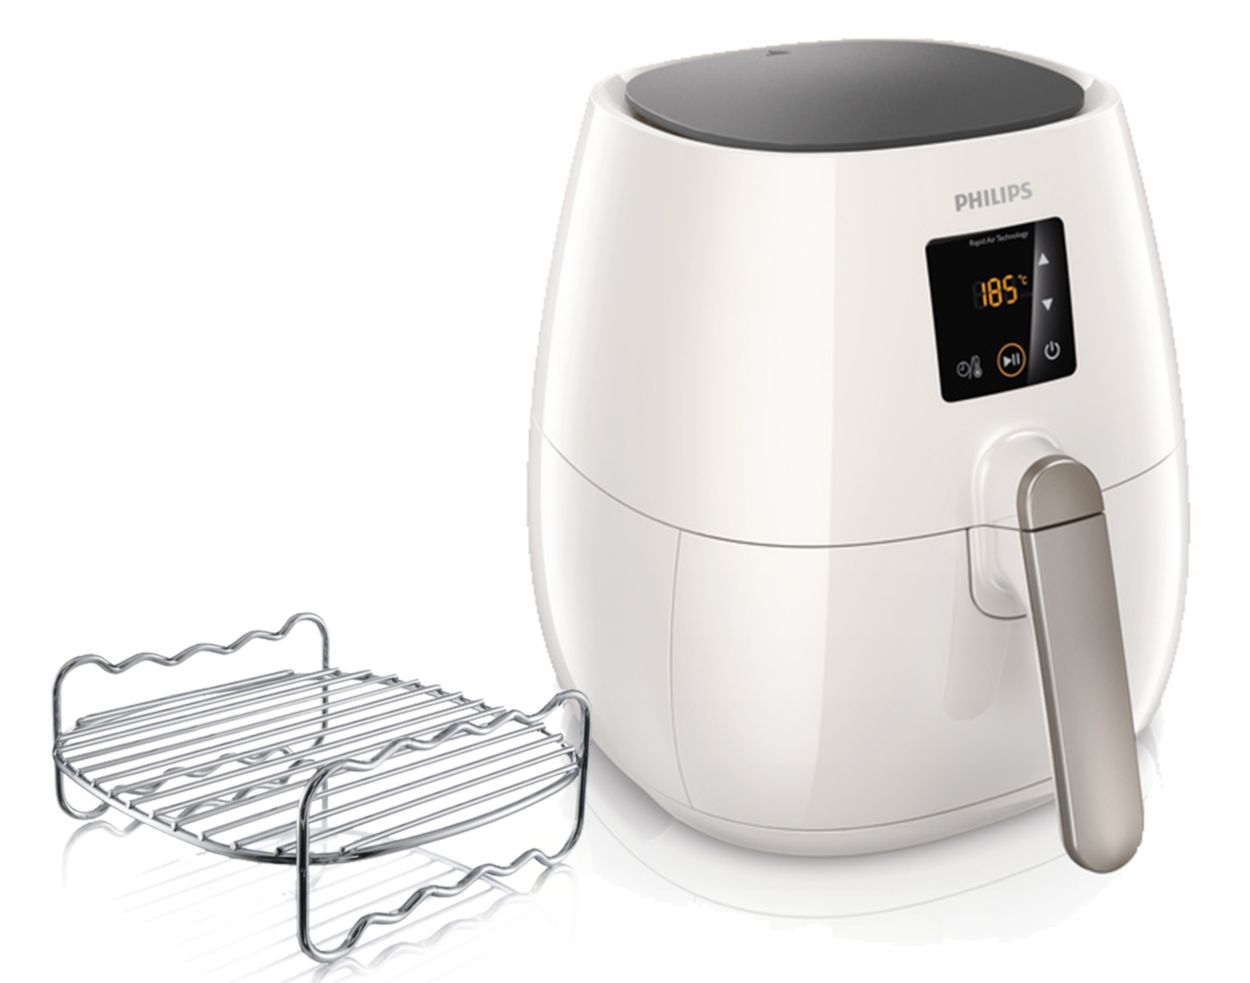 Philips Air Fryer Viva Collection - Adjustable Temperature Control up to  390 Degrees, Dishwasher-Safe - White Silk 